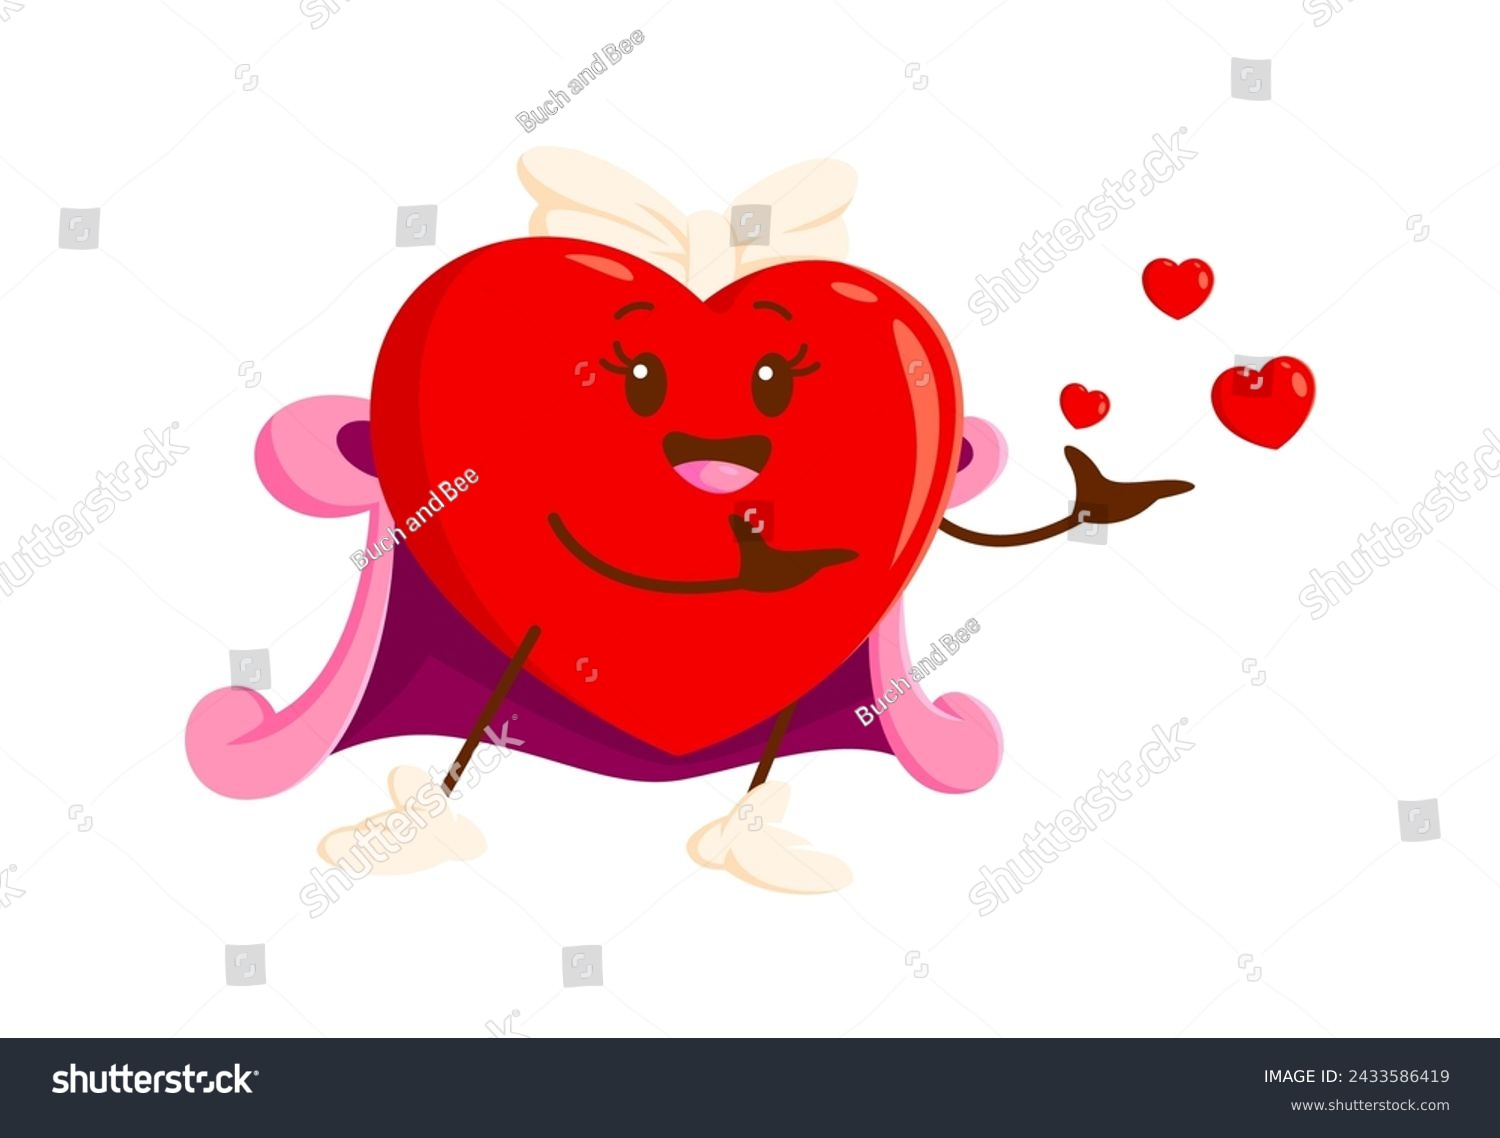 SVG of Cartoon love heart character sends kisses. Isolated vector romantic girl personage playfully blowing red hearts at valentines day, flirting or radiating affection with adorable and lovable expression svg